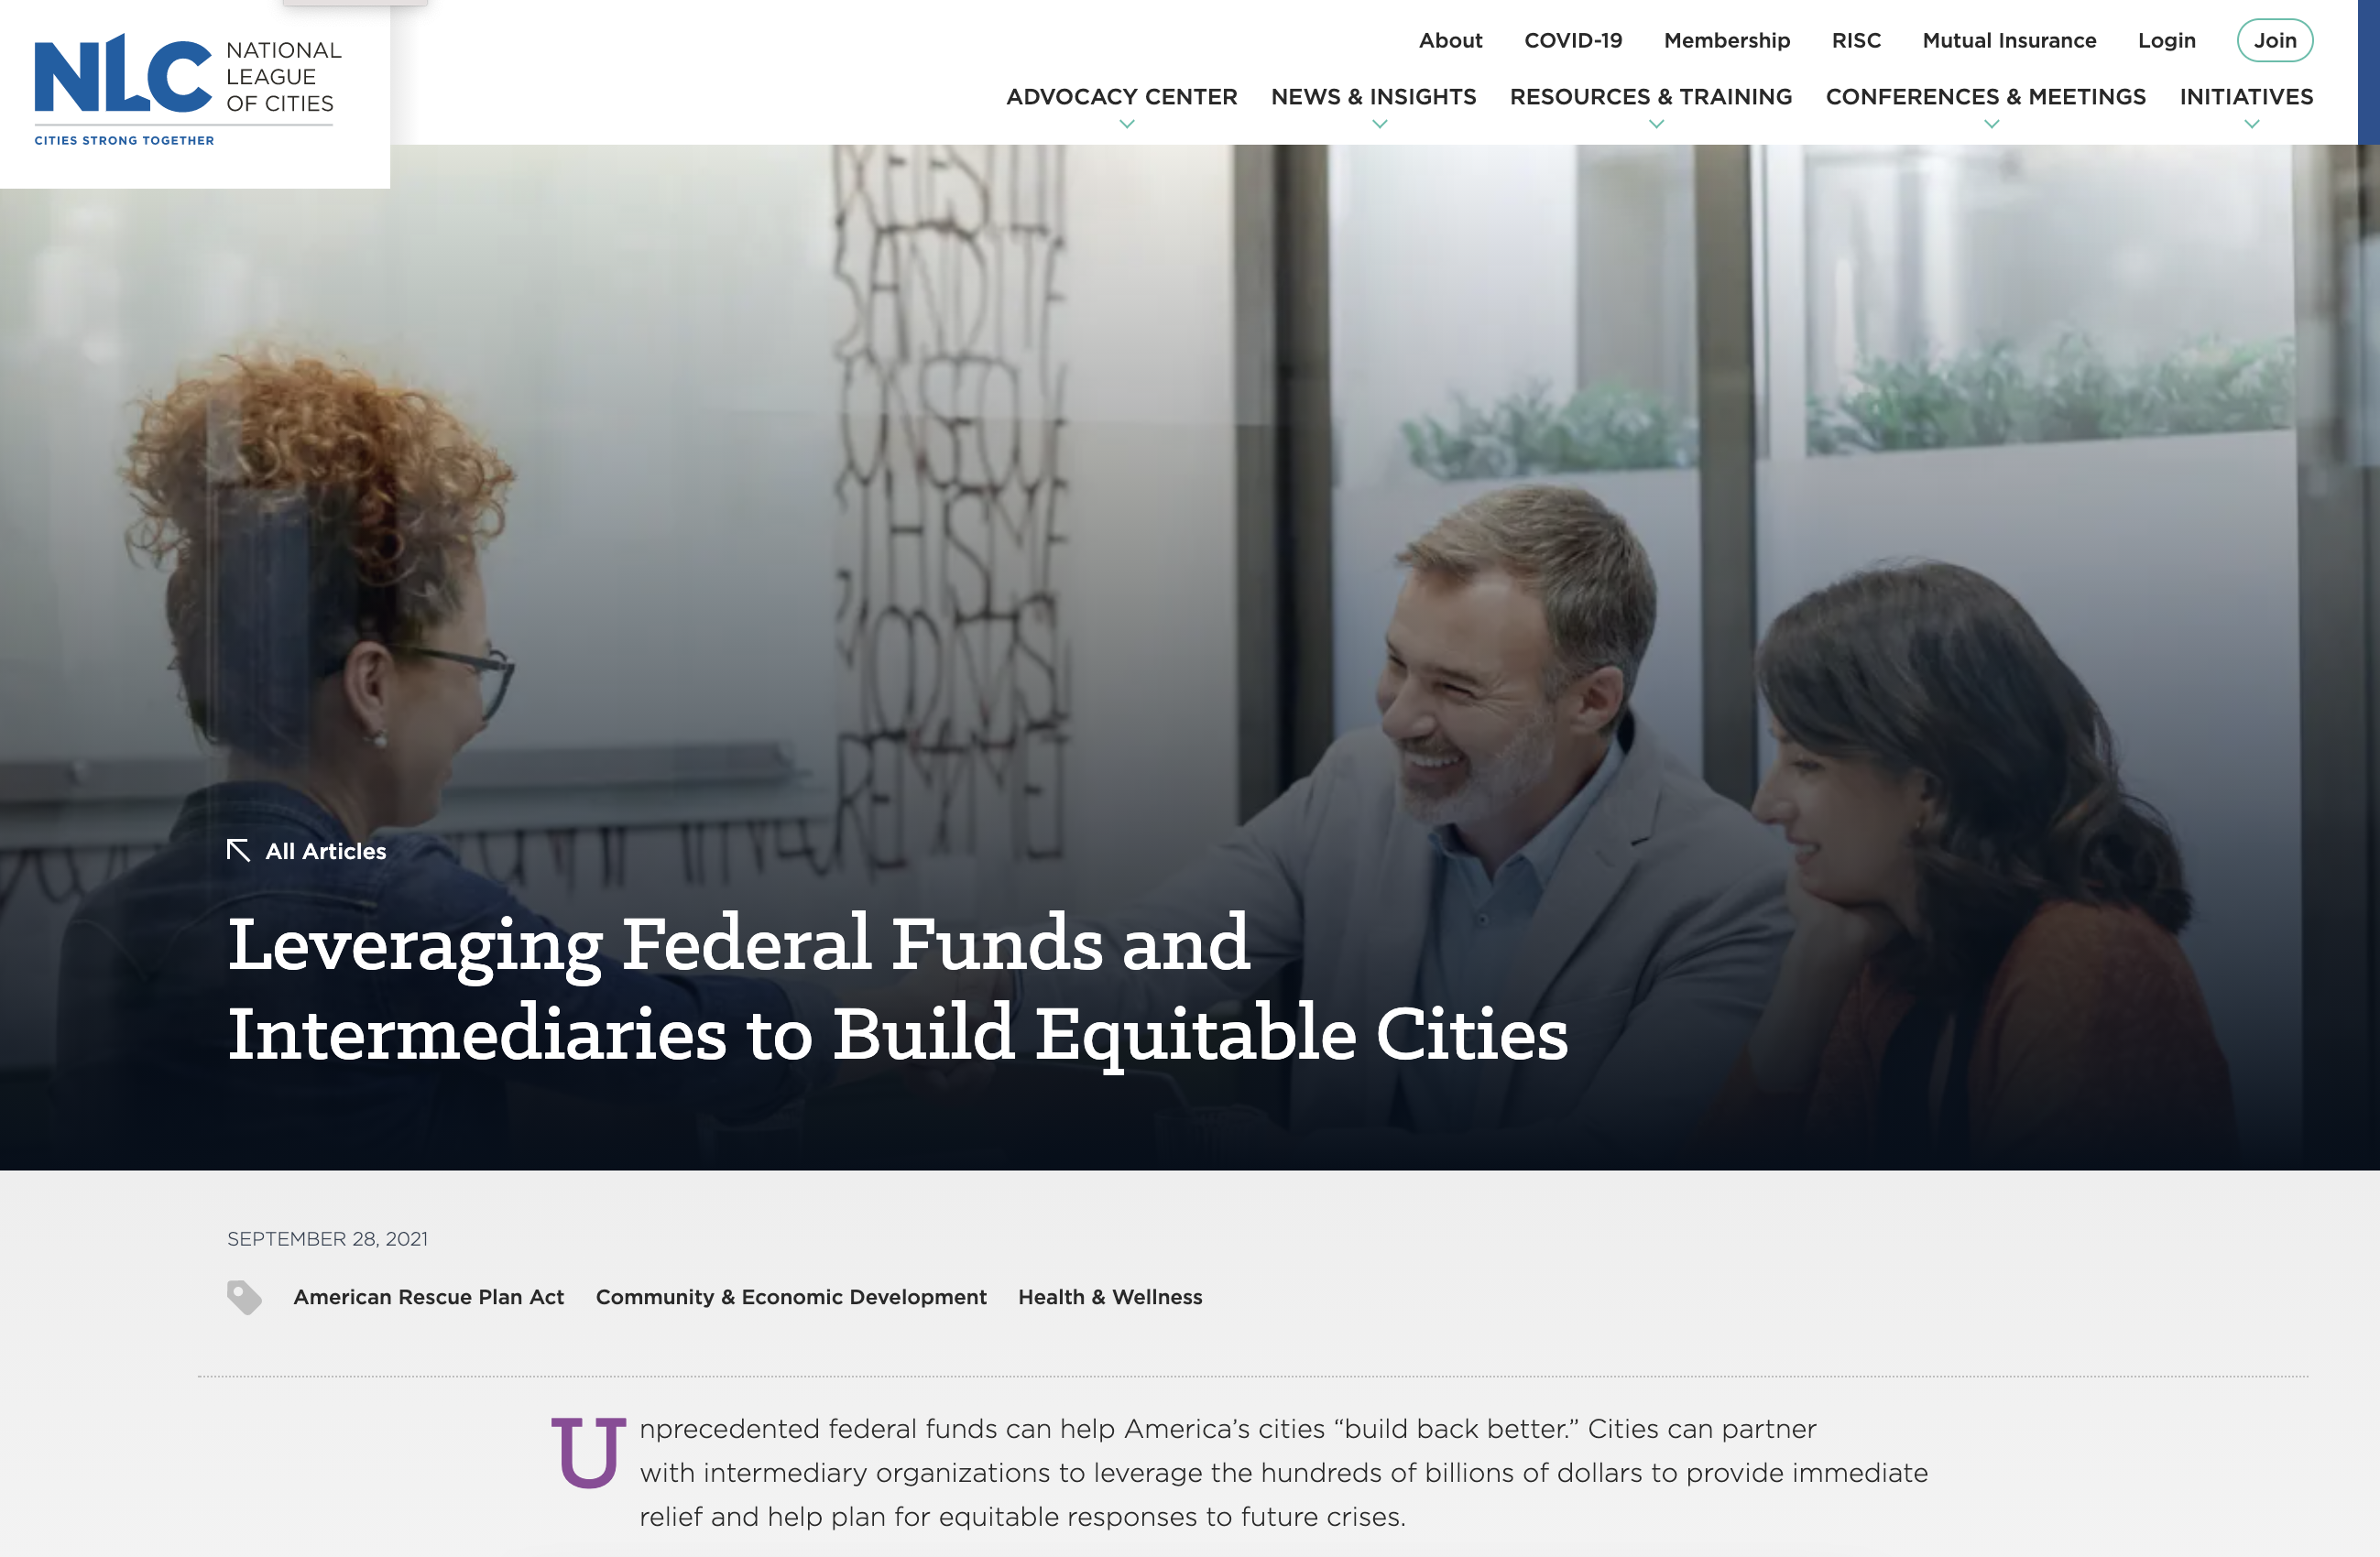 Leveraging Federal Funds and Intermediaries to Build Equitable Cities